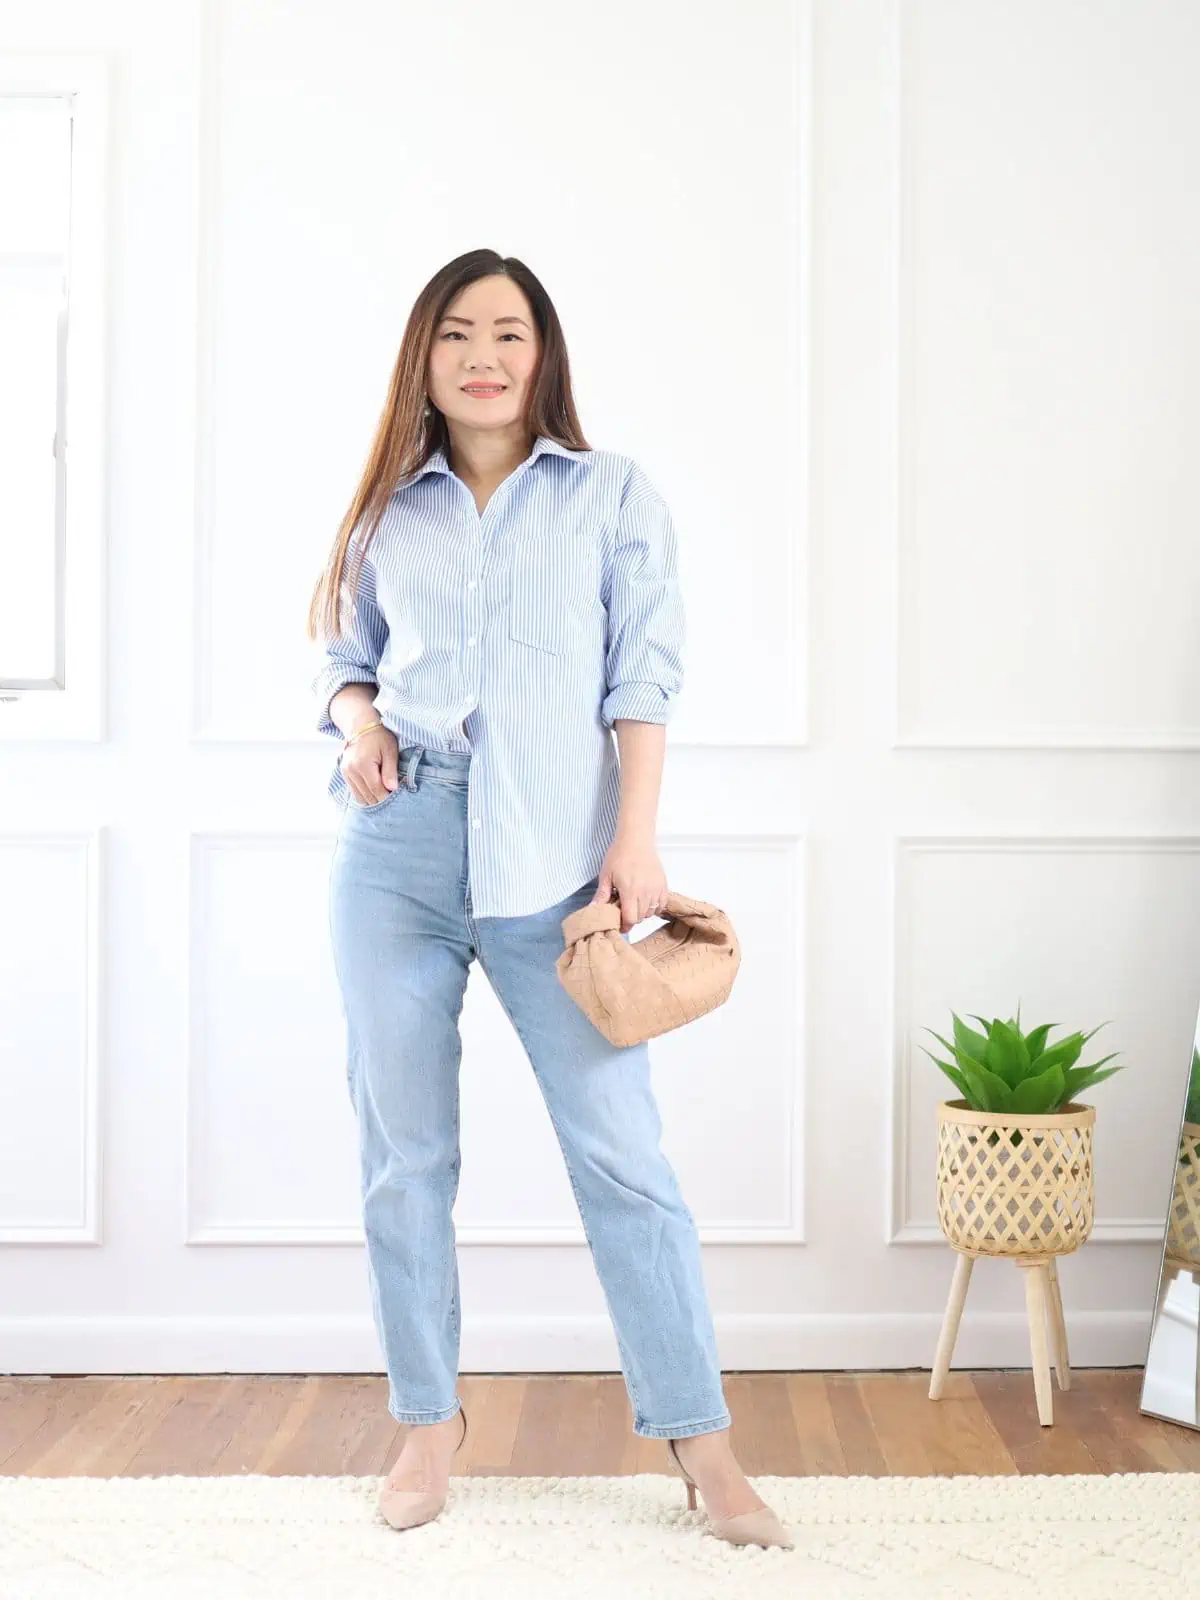 I'm 5'2, here's the 12 Best Types of Jeans for Short Women - Petite  Dressing